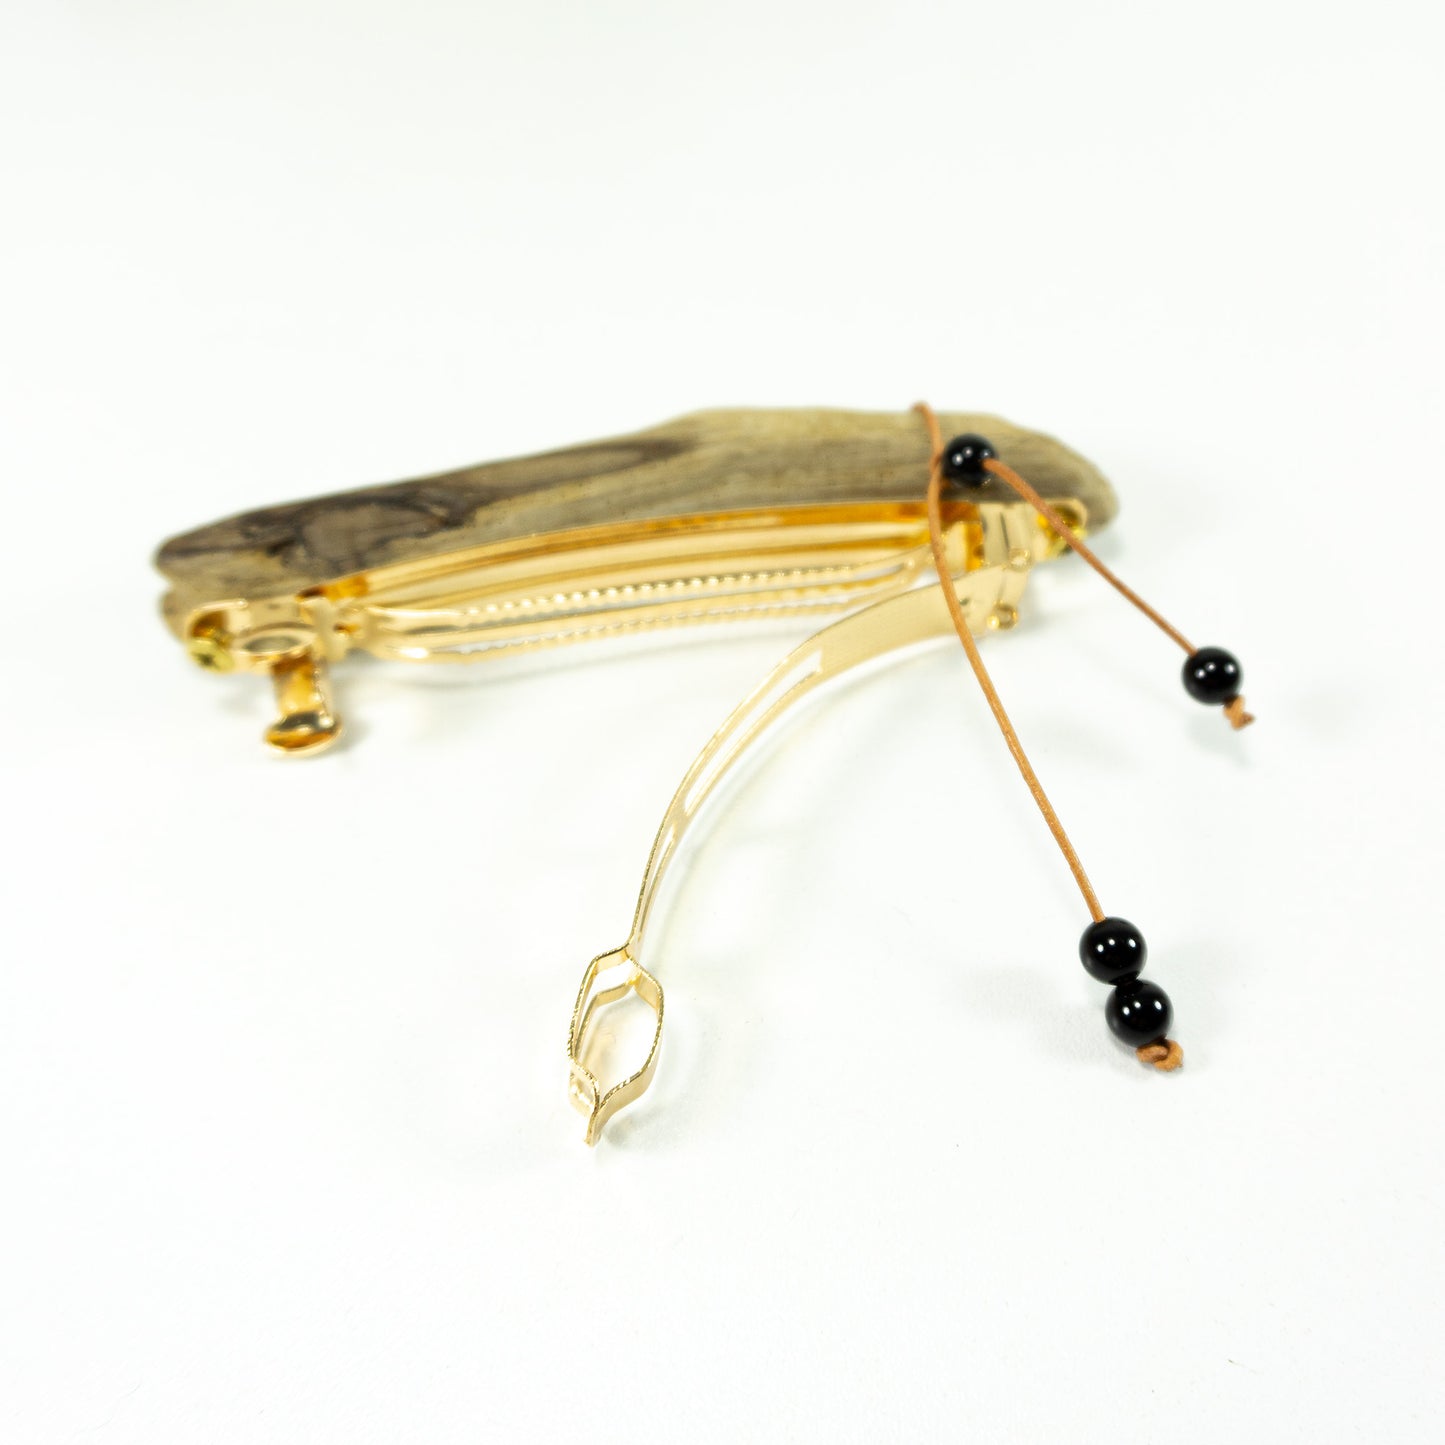 Unique handmade golden DRIFTWOOD HAIR BARRETTE 'Mary' leather Onyx